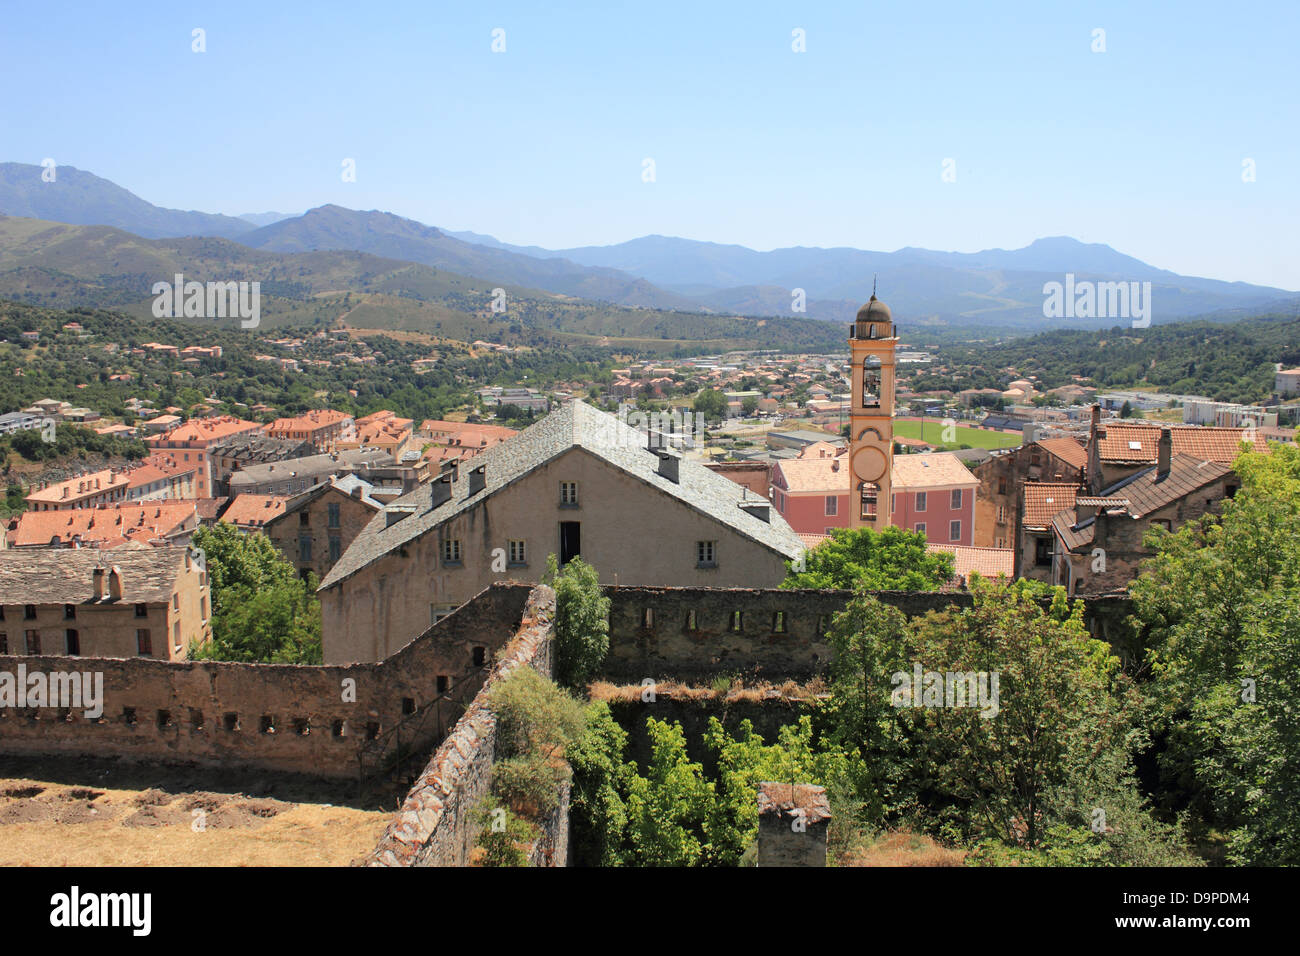 Church in town of Corte, Corsica, France Stock Photo